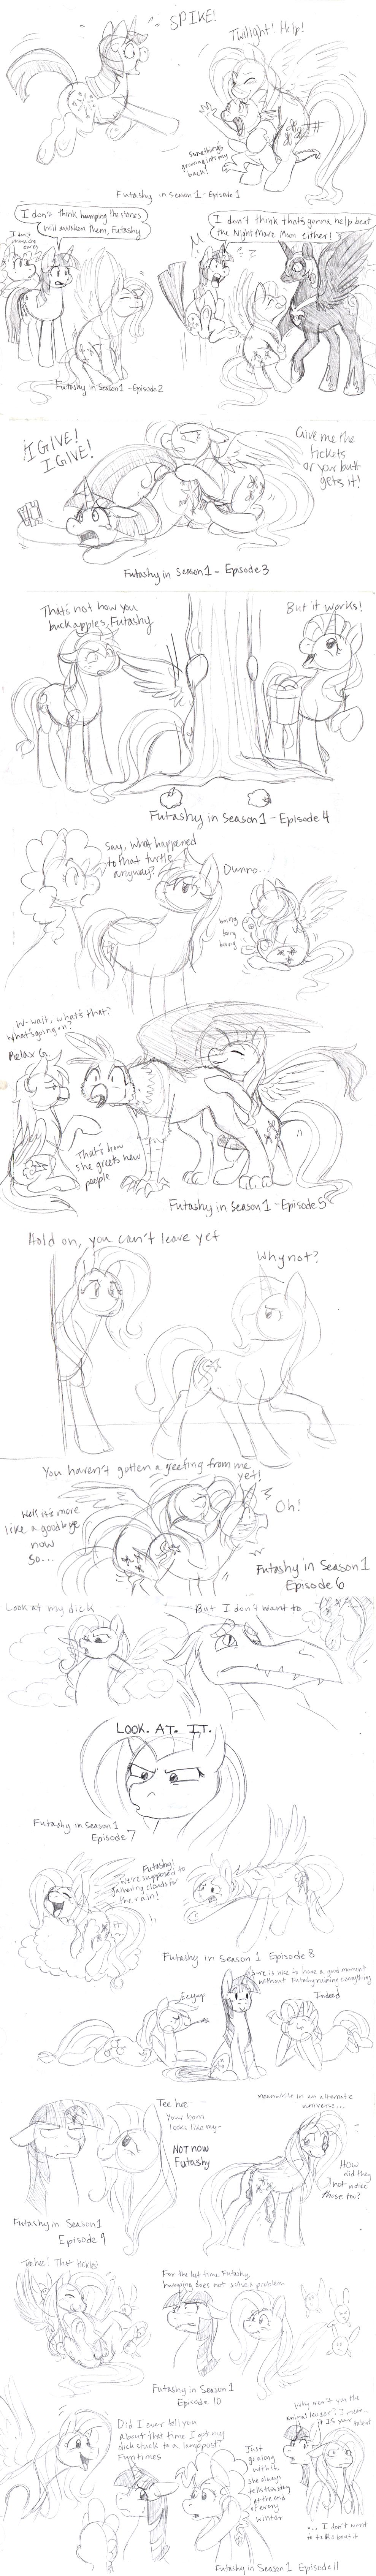 mlp fanfiction and applejack spike My little pony friendship is magic spitfire